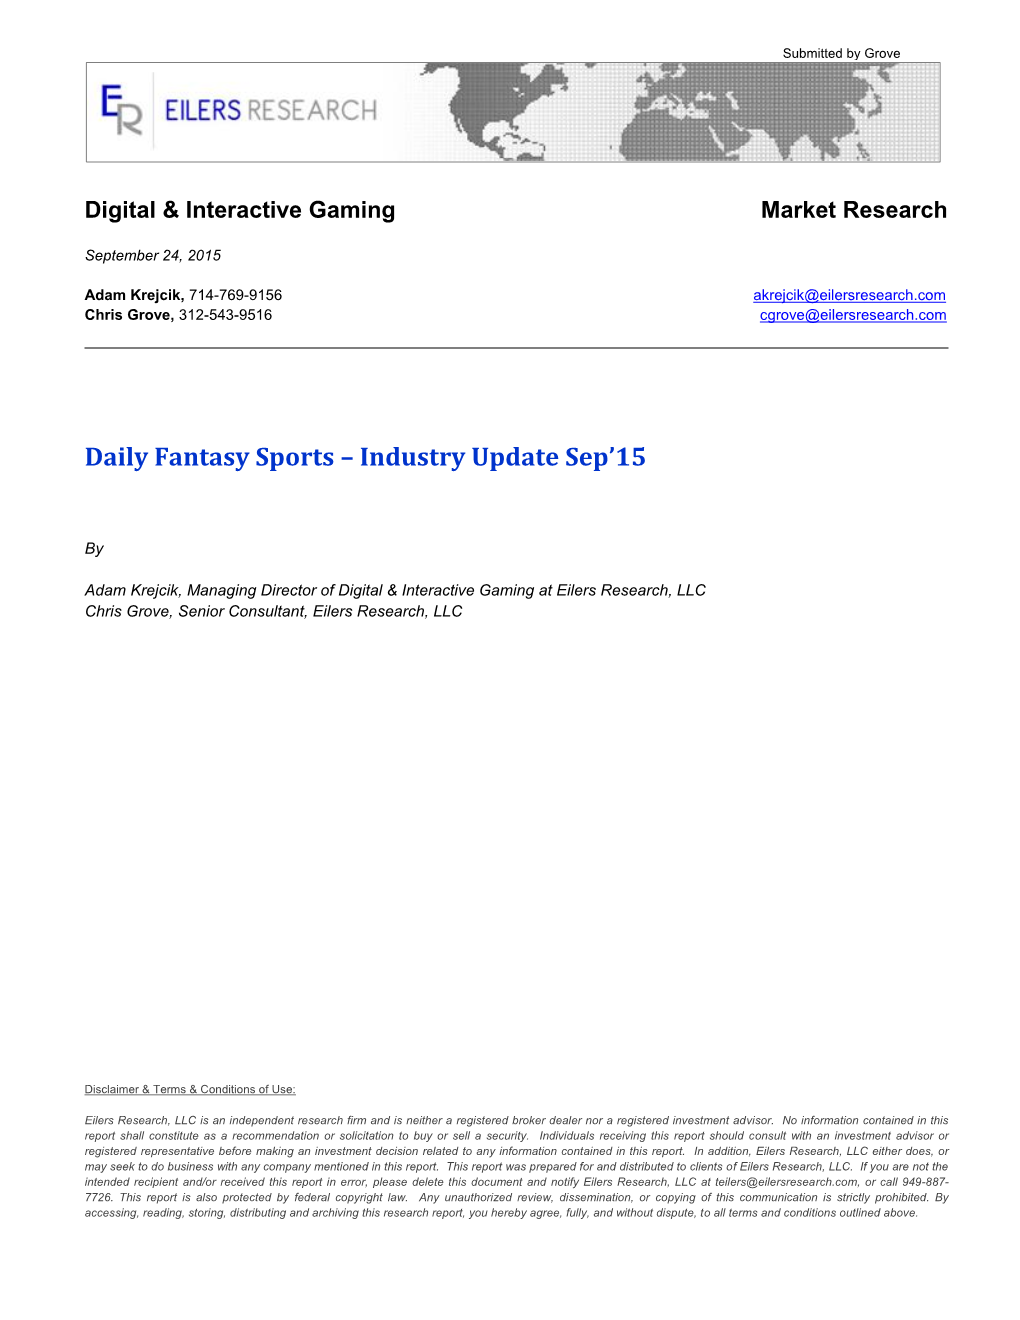 Daily Fantasy Sports – Industry Update Sep'15